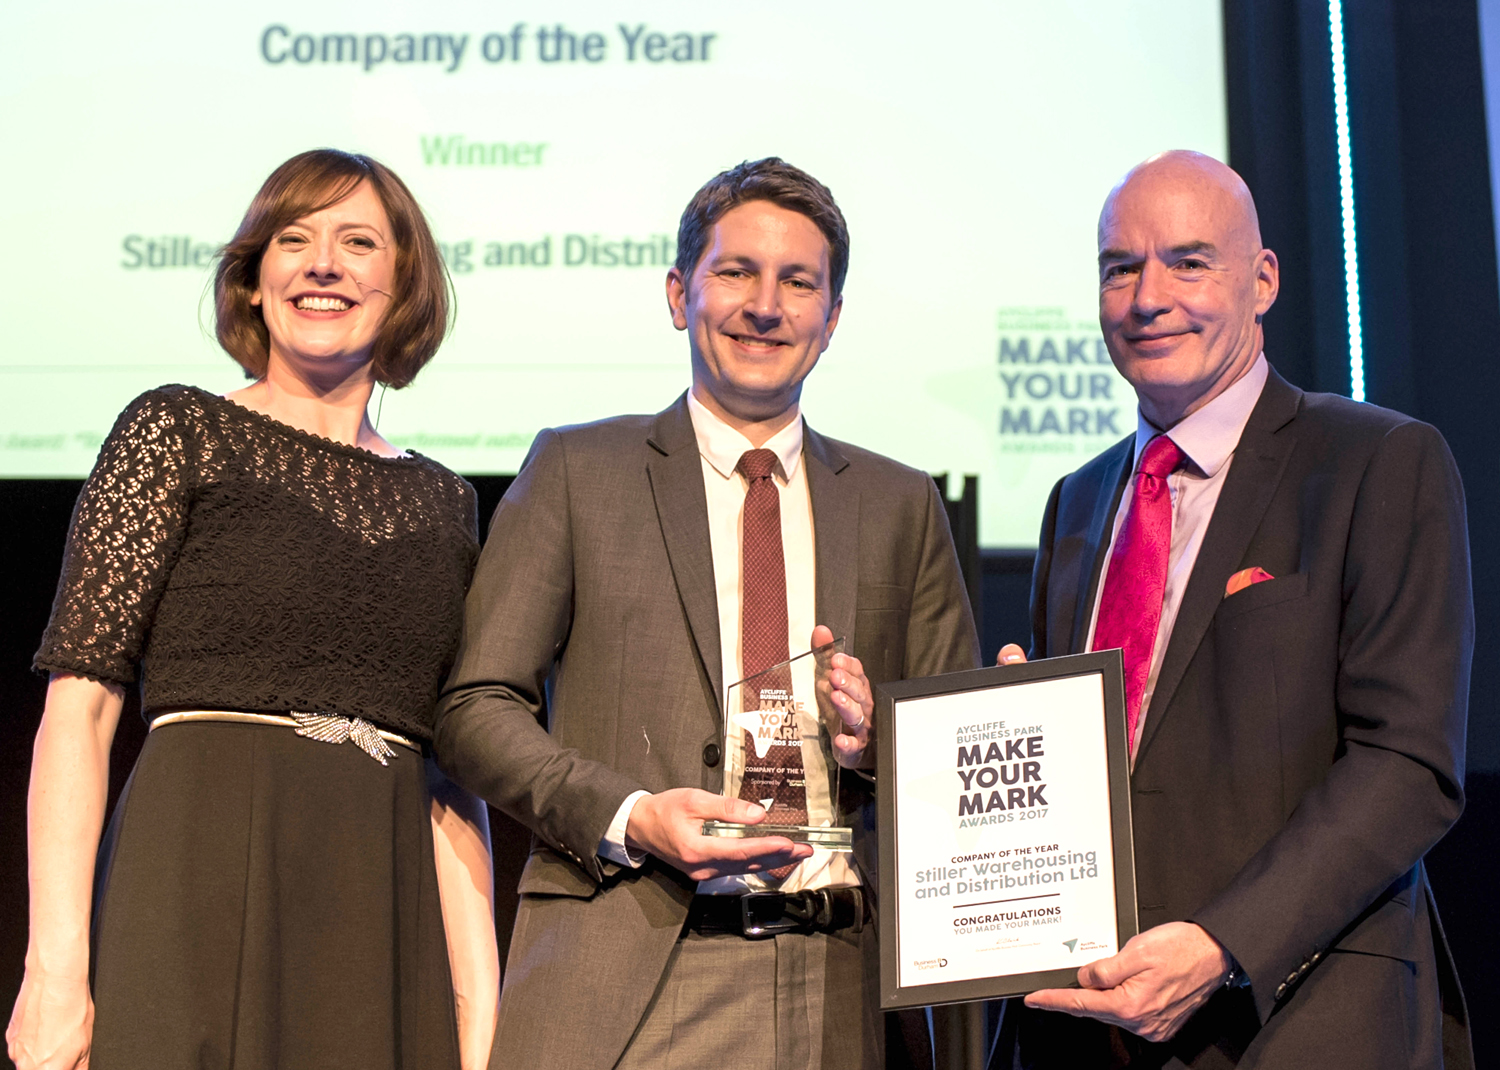 Stiller – Aycliffe’s Company of the Year